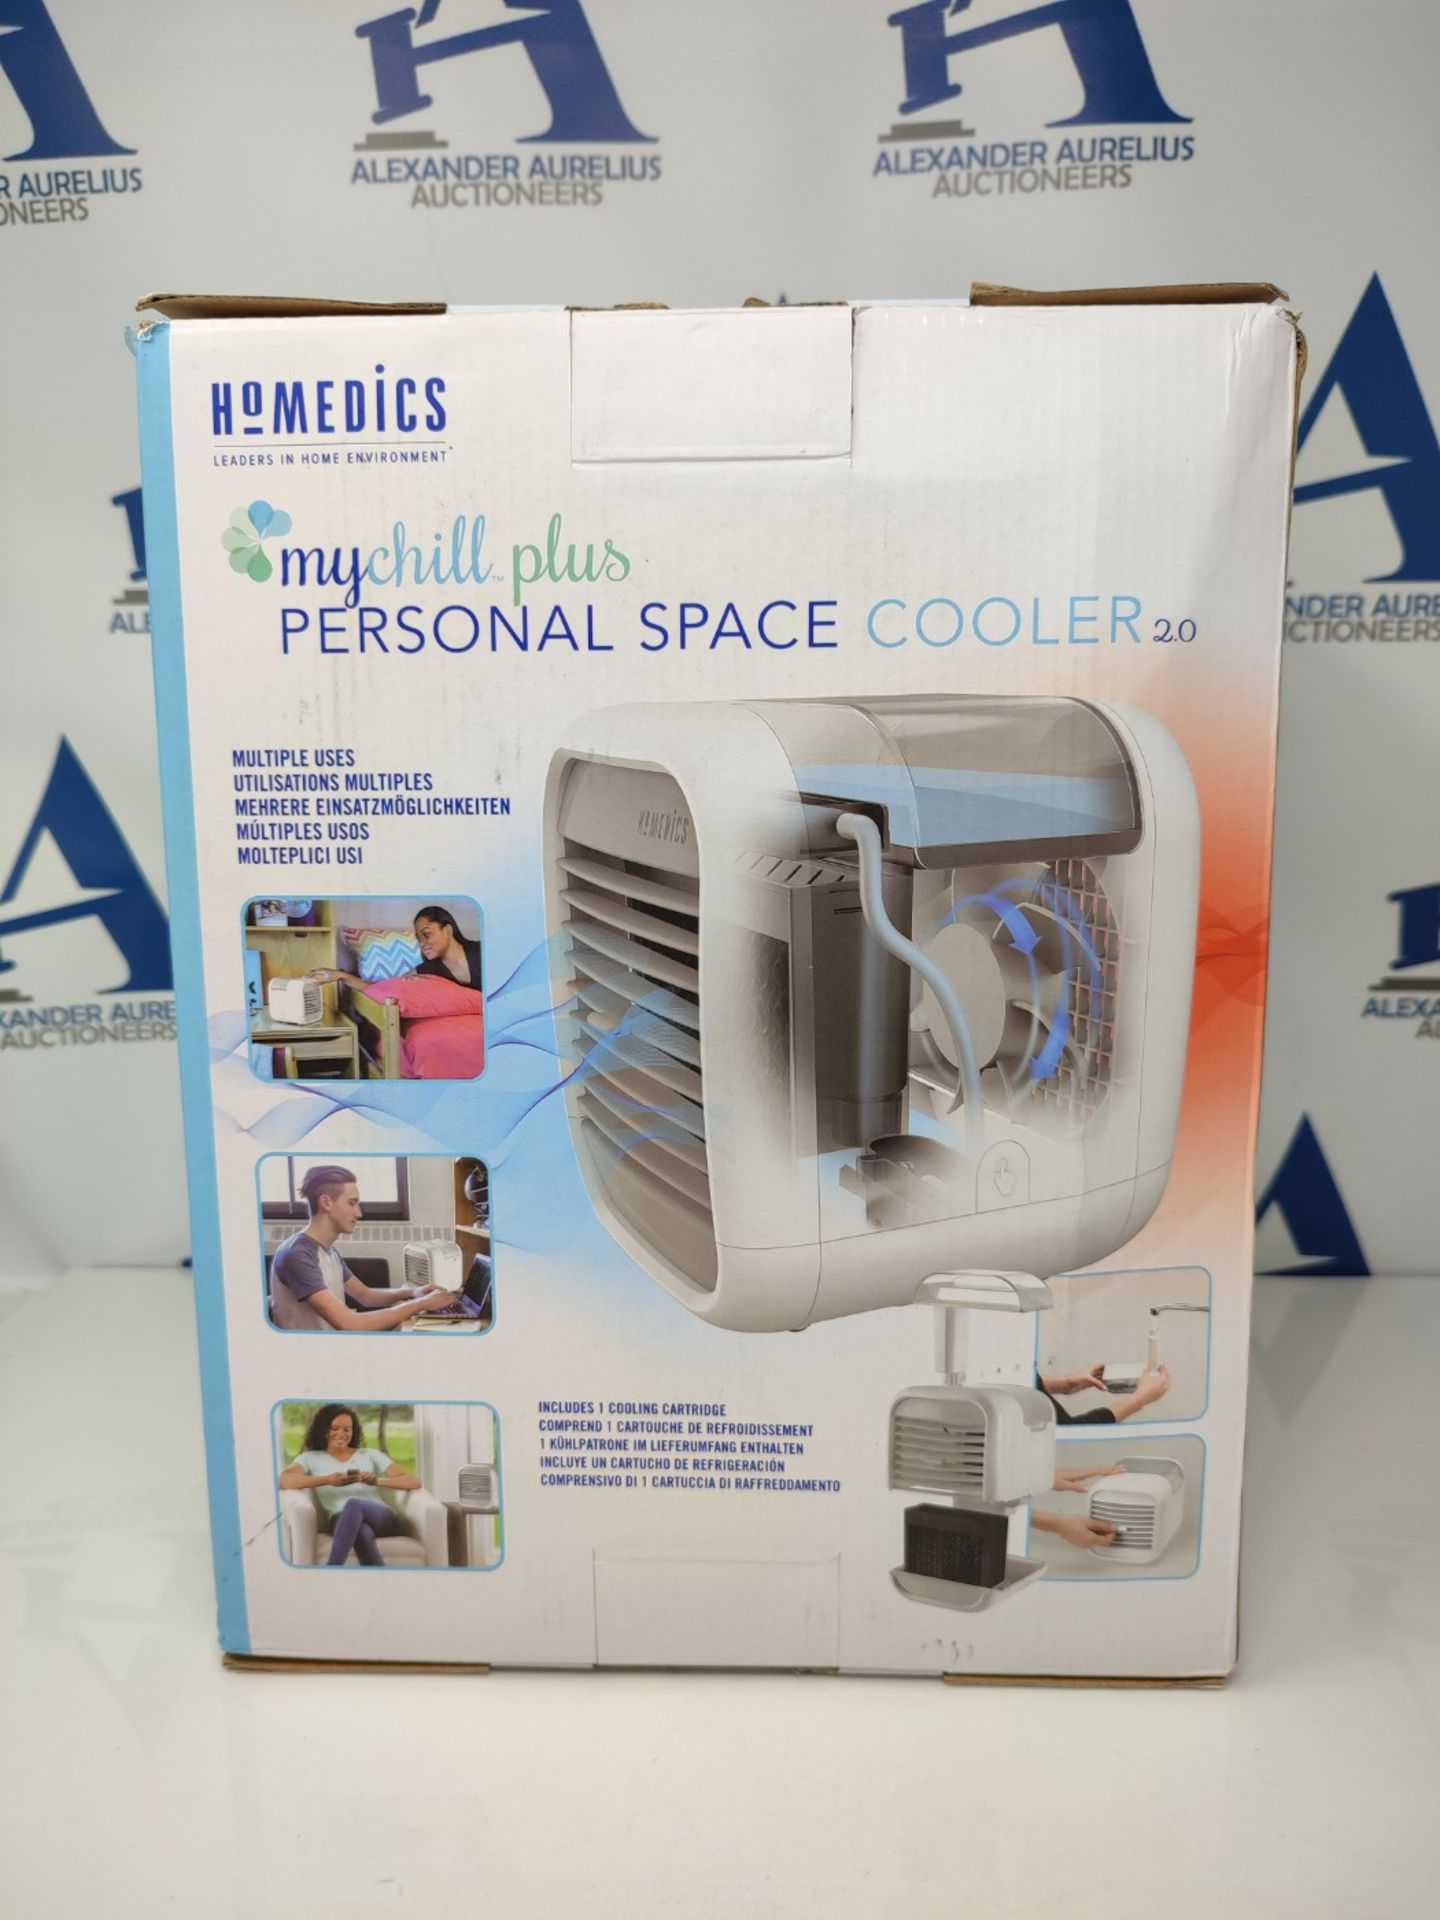 HoMedics PAC-35WT-EU2 Personal Space Cooler, MyChill Plus, 1.8 Metre Cooling Area, 3 S - Image 7 of 10